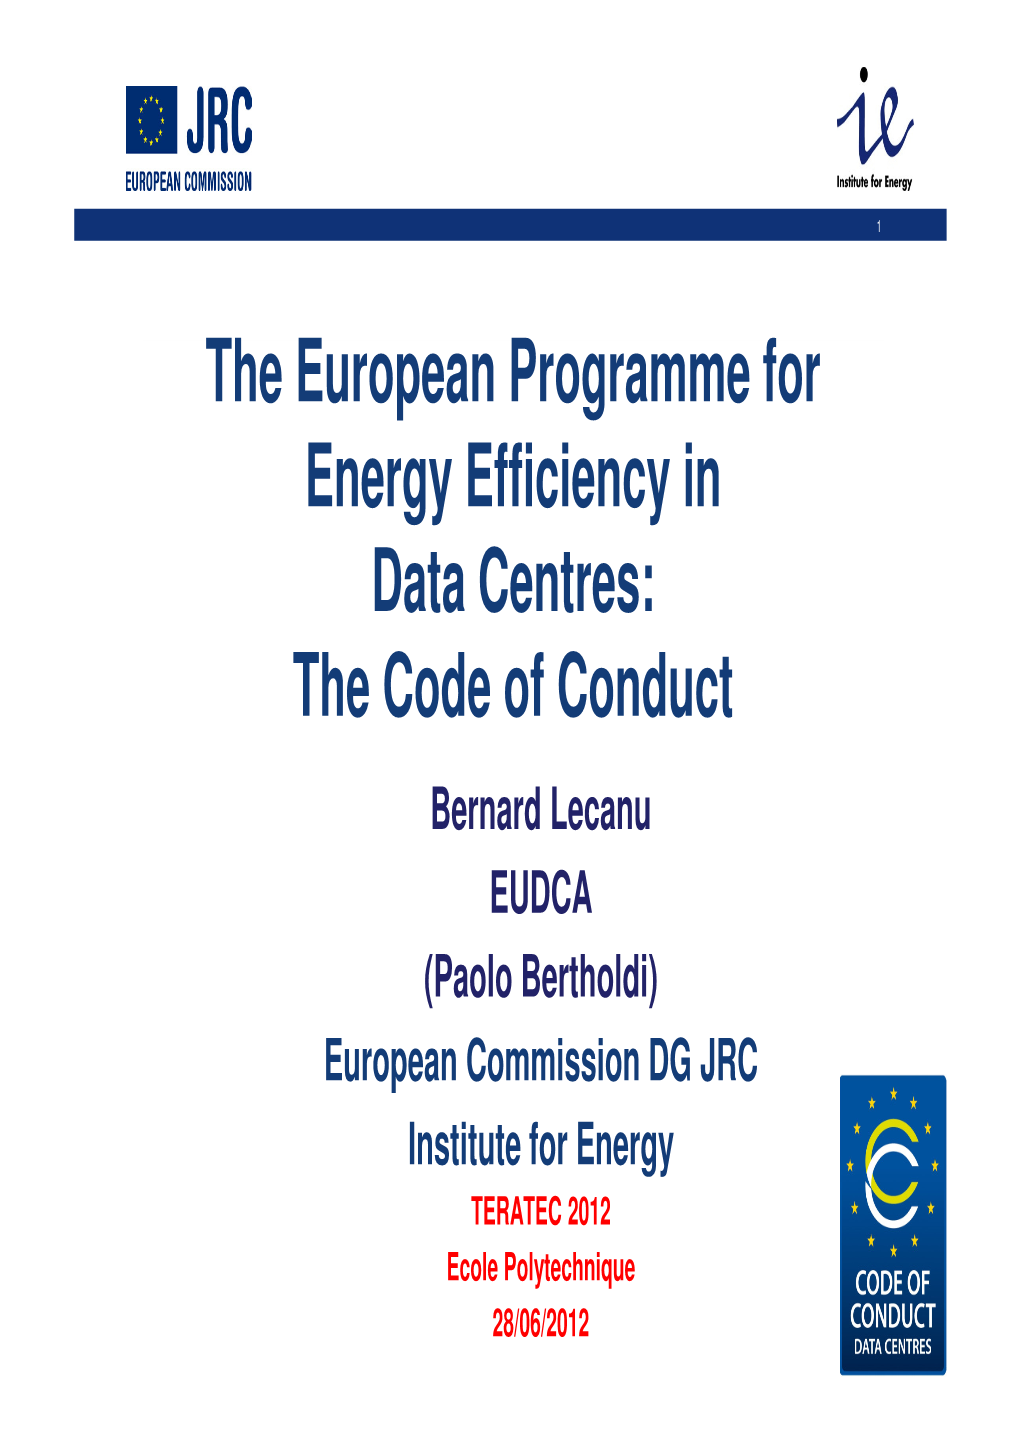 The European Programme for Energy Efficiency in Data Centres